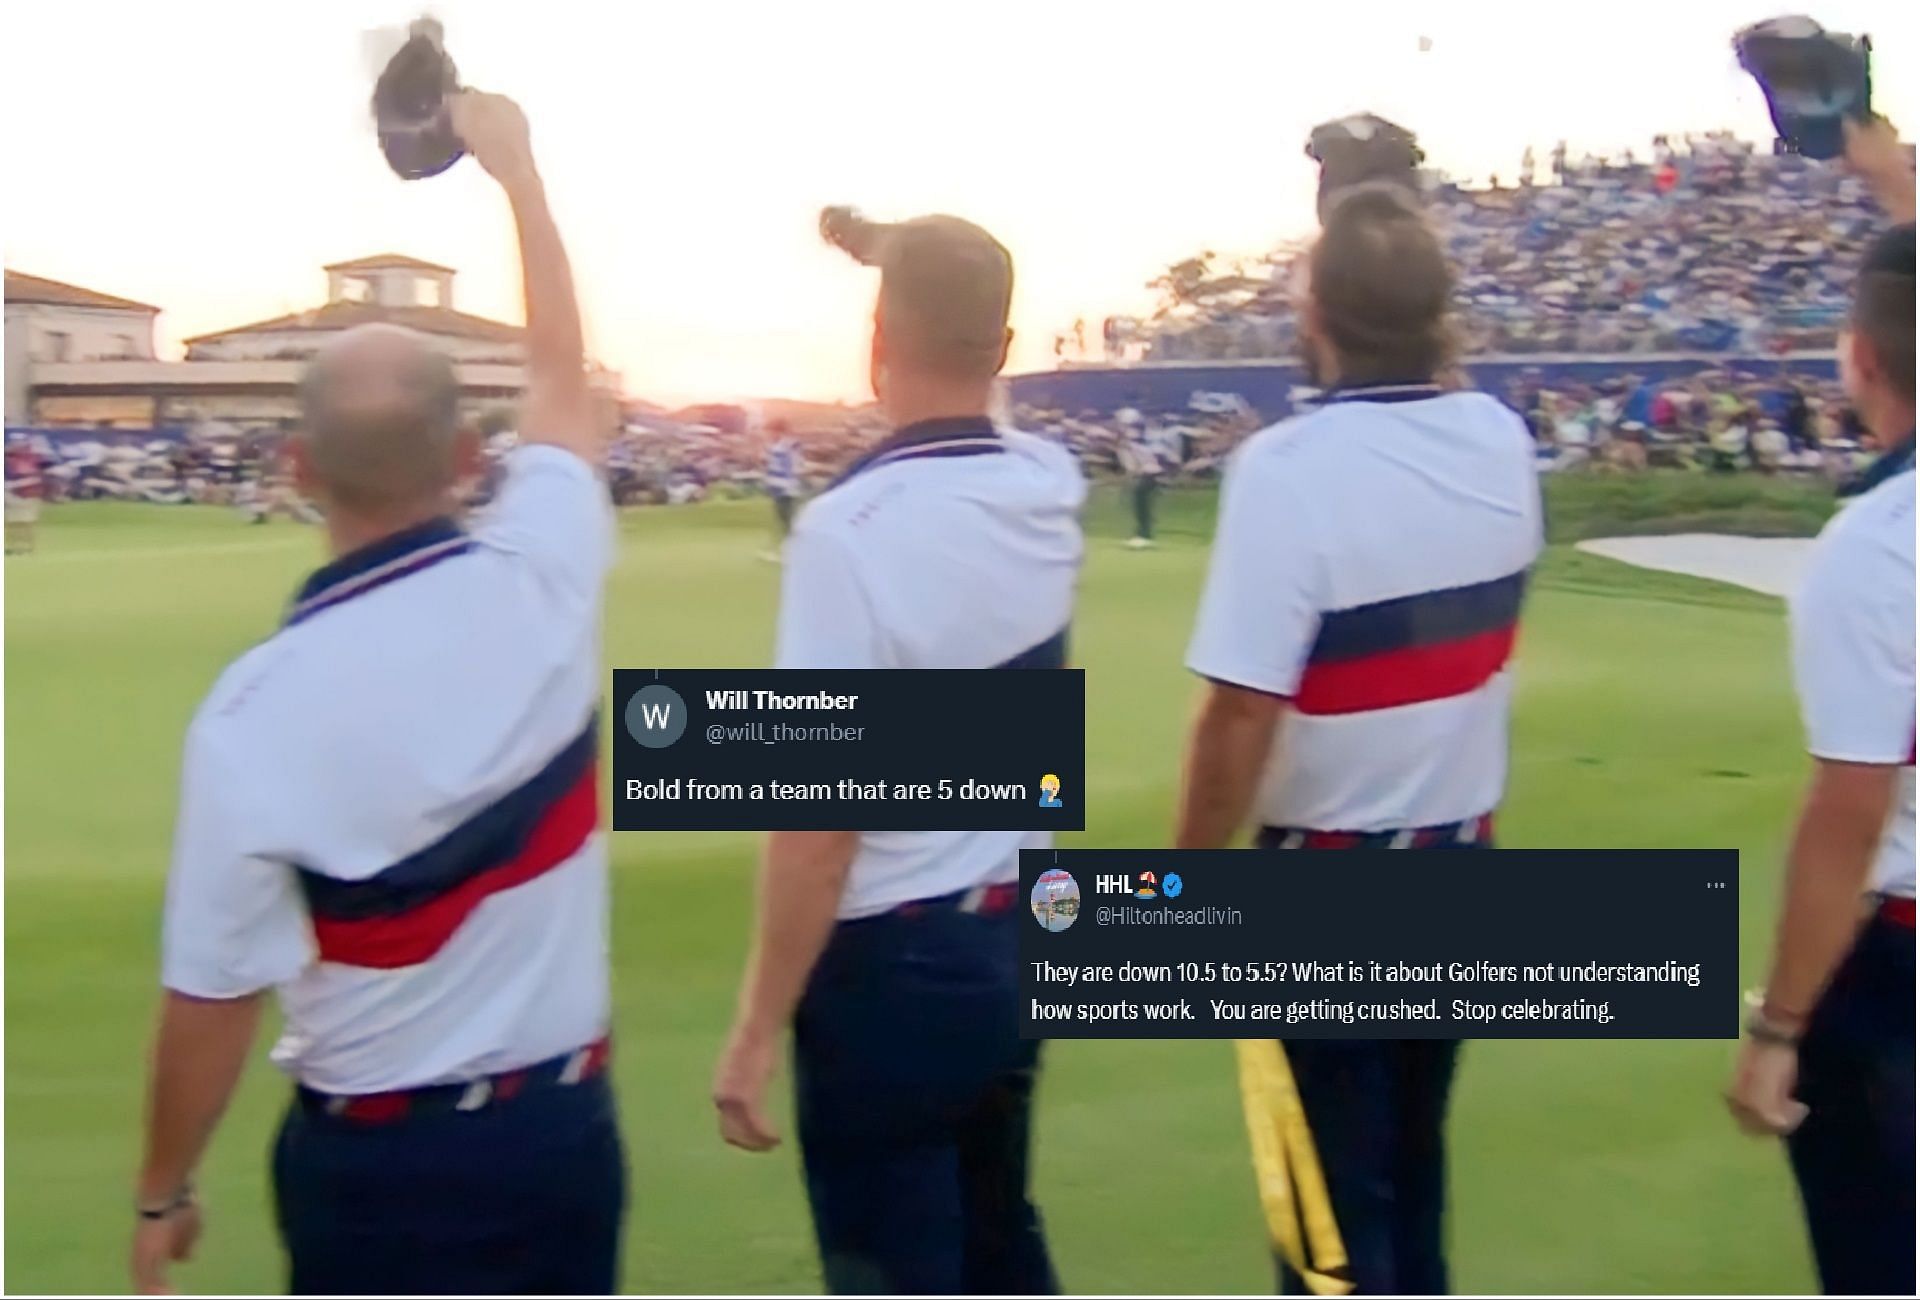  Team America waving hats to European crowd at the 2023 Ryder Cup (via X/Twitter/@NUCLRGOLF)